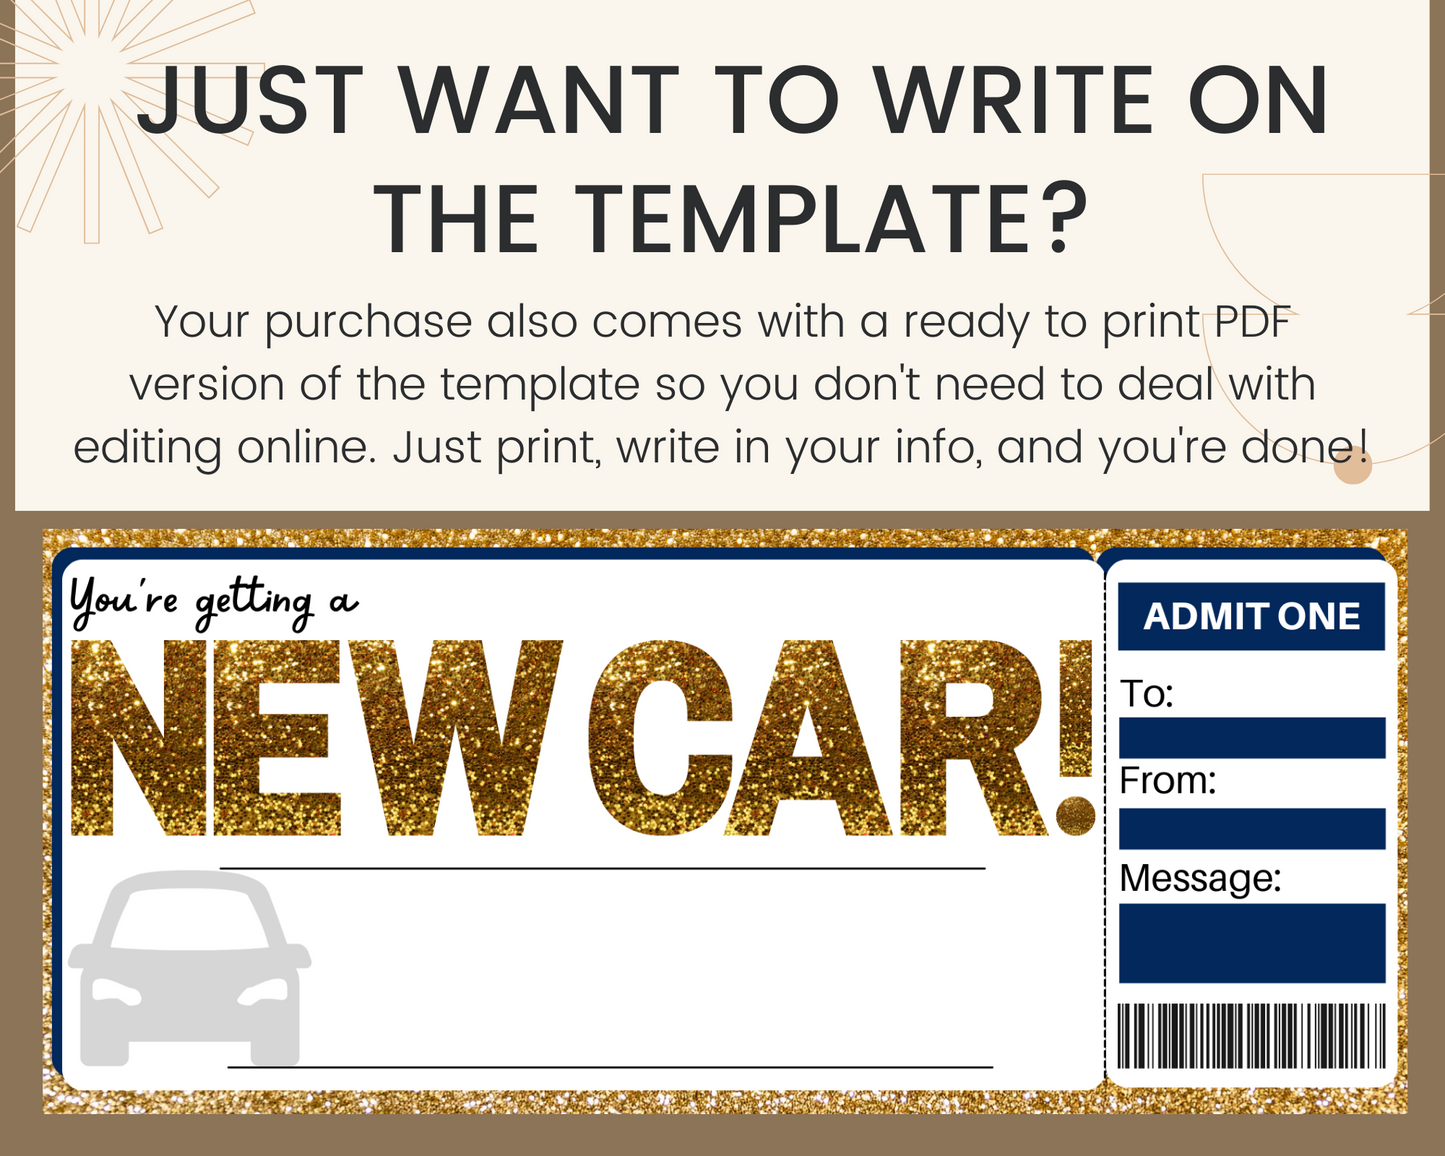 New Car Gift Certificate Template